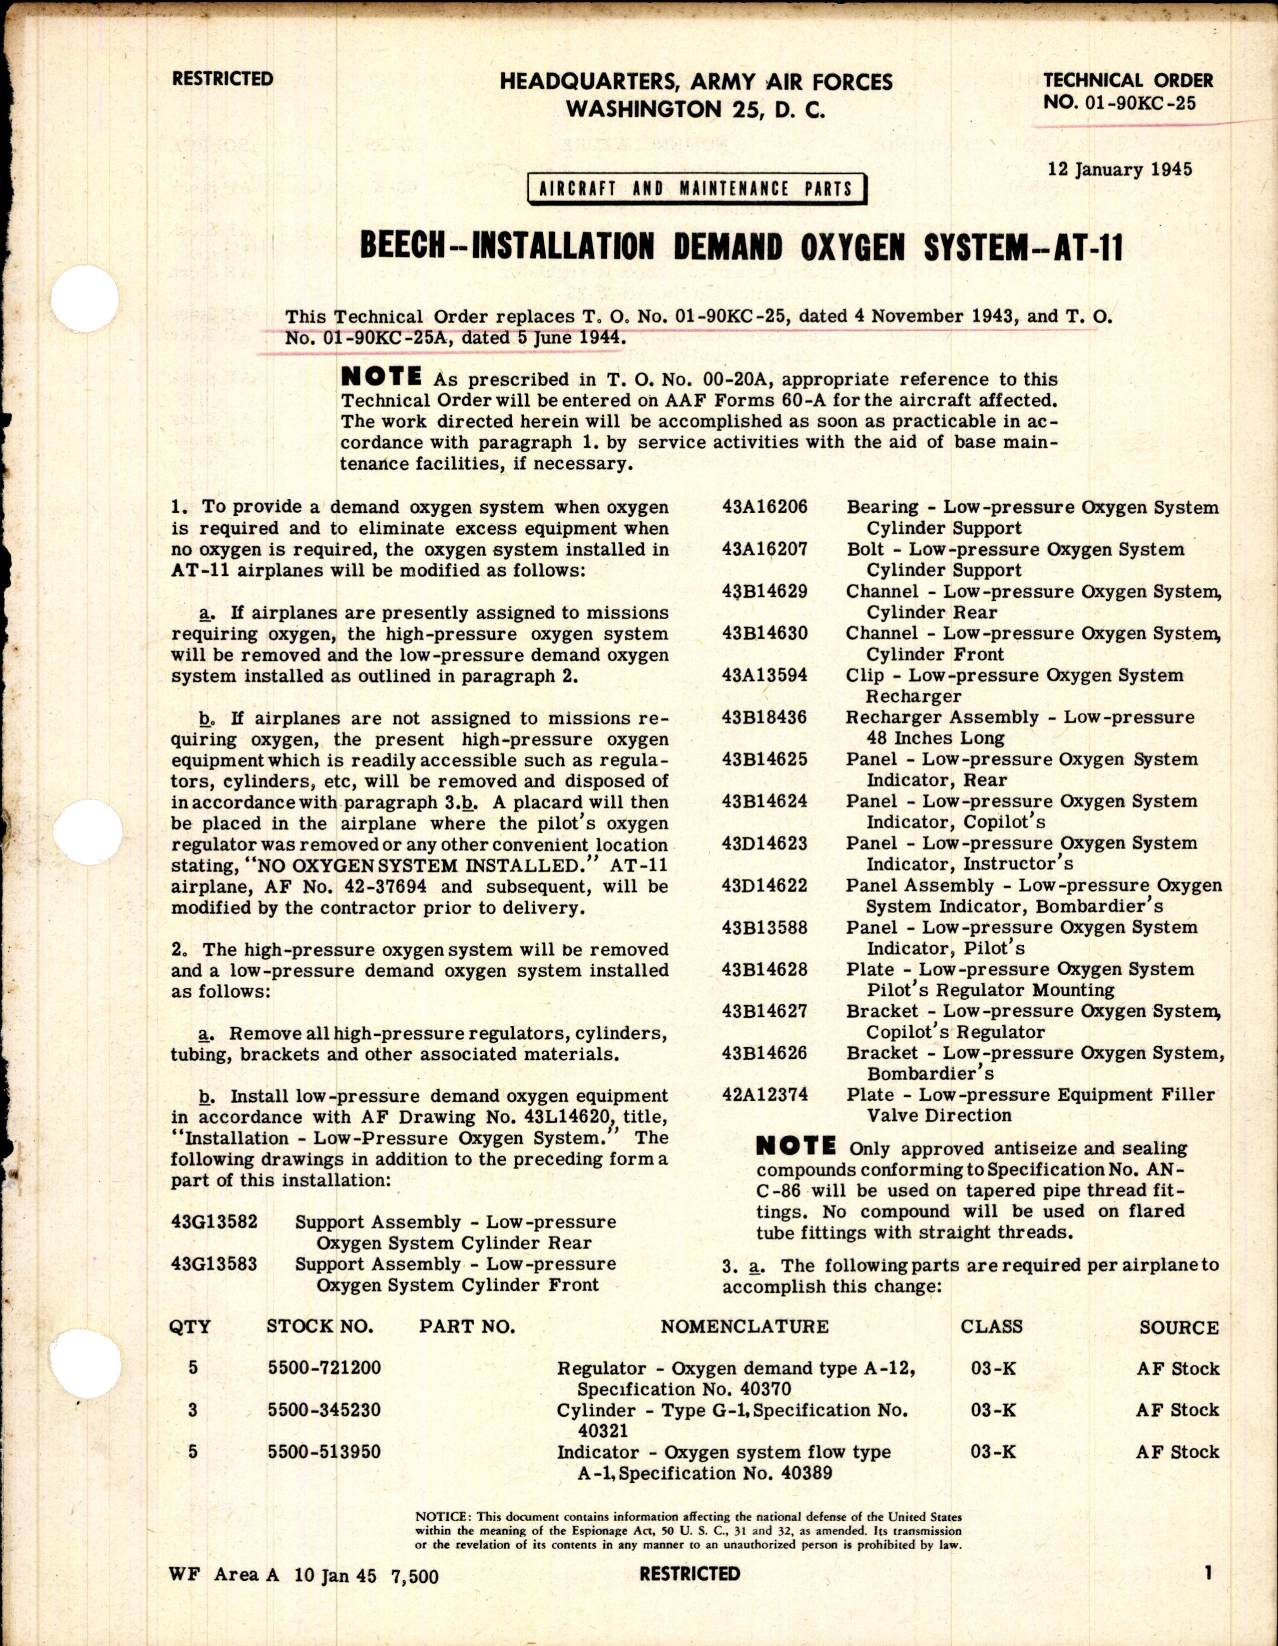 Sample page 1 from AirCorps Library document: Installation Demand Oxygen System for AT-11